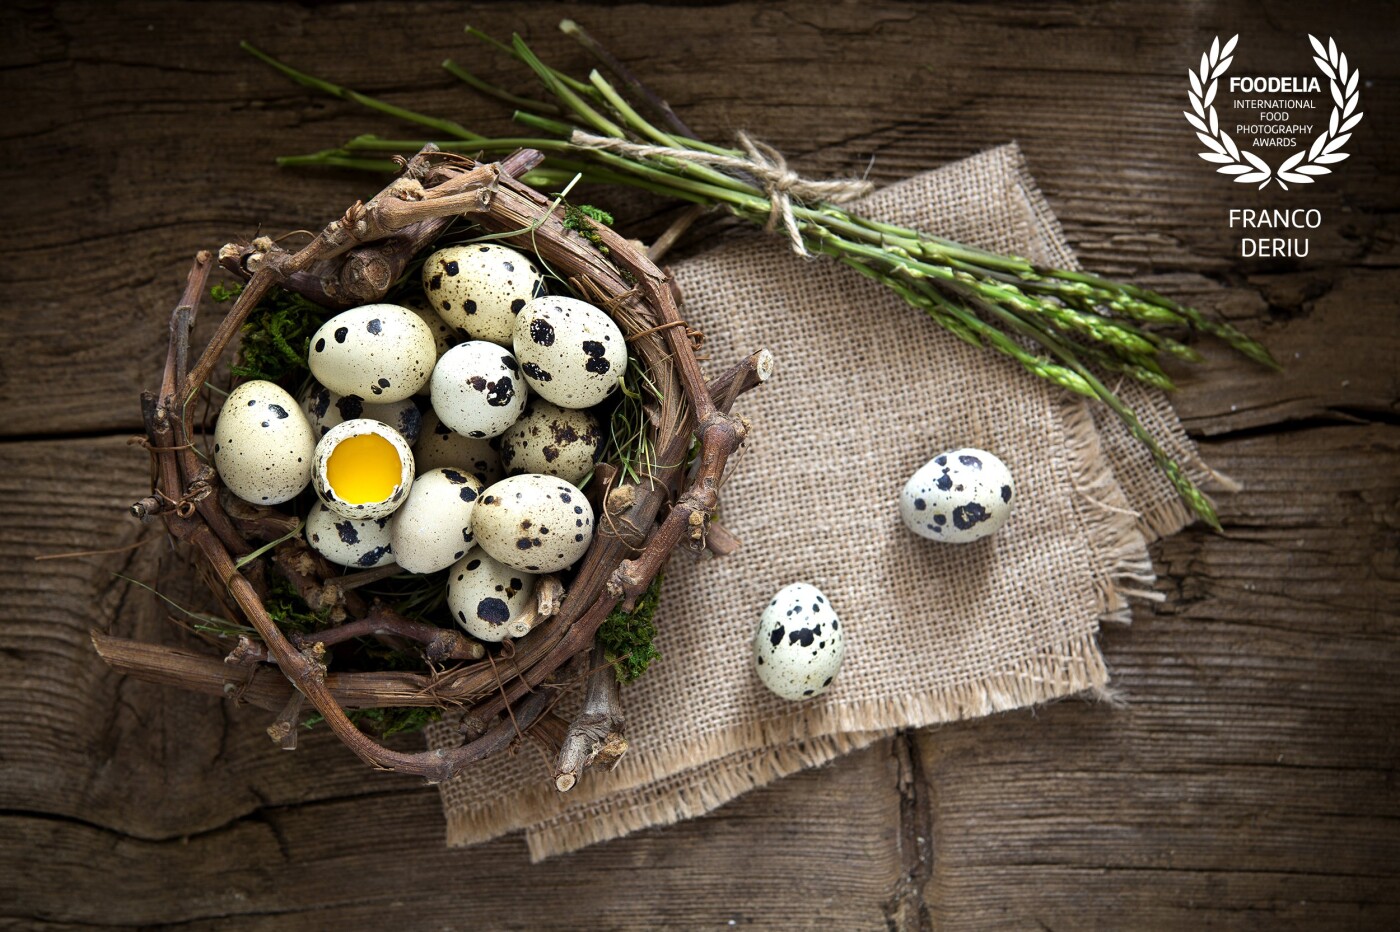 This photo was taken on Easter, I think the quail eggs have been essential to the success of this photograph, all done with care without leaving anything to chance, especially the light control, I would be happy.